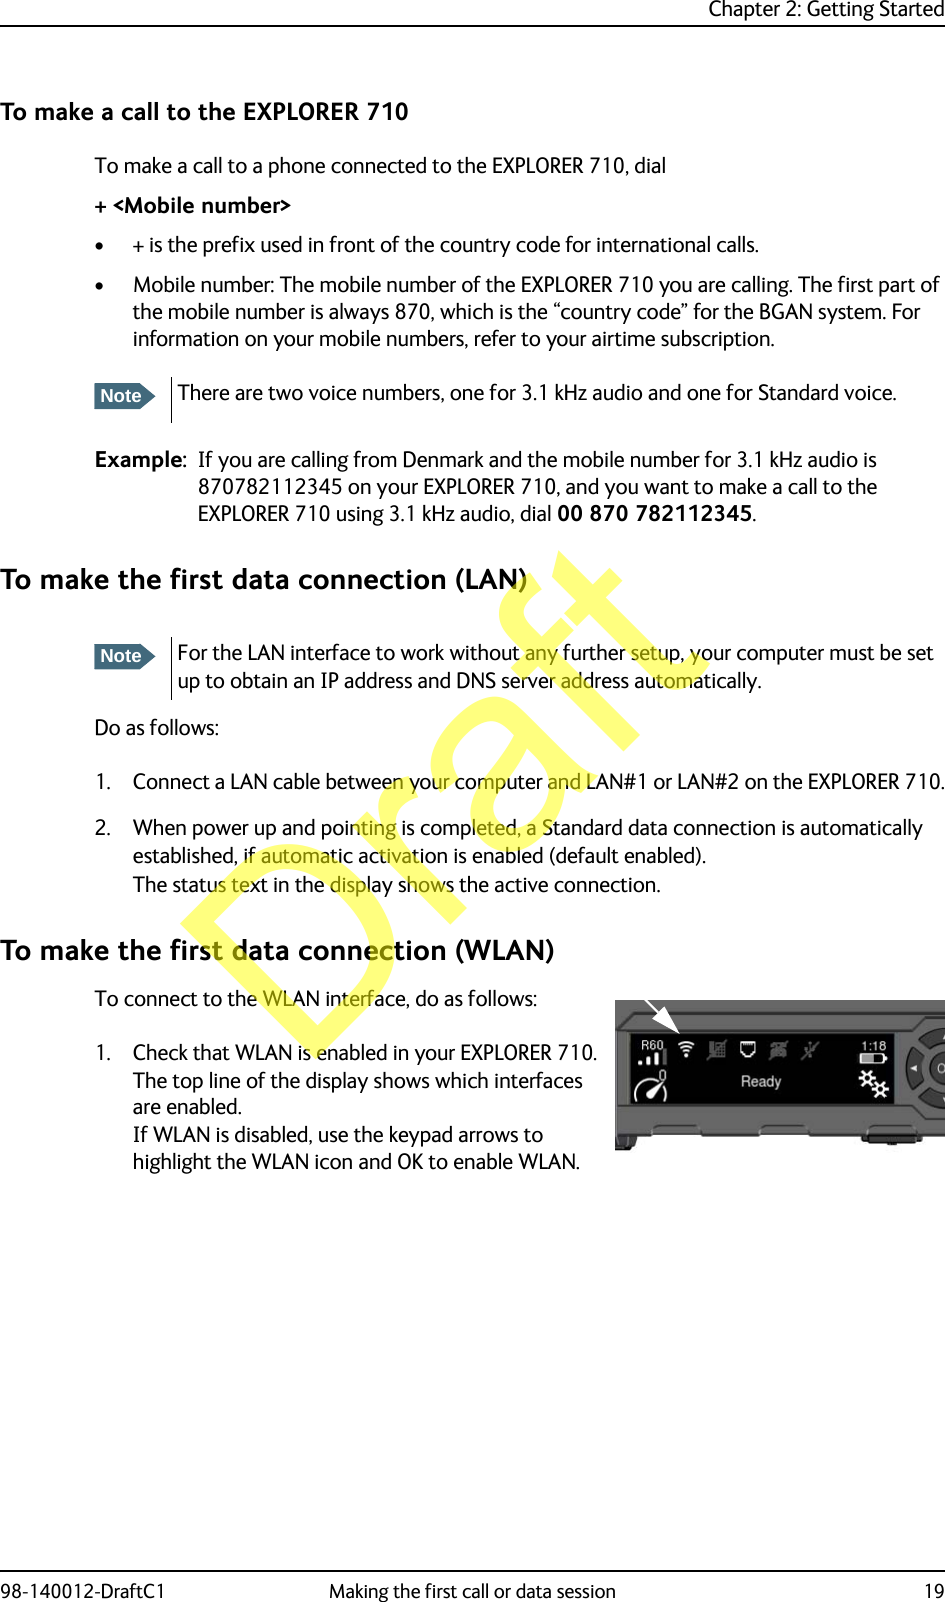 Chapter 2: Getting Started98-140012-DraftC1 Making the first call or data session 19To make a call to the EXPLORER 710To make a call to a phone connected to the EXPLORER 710, dial+ &lt;Mobile number&gt;• + is the prefix used in front of the country code for international calls.• Mobile number: The mobile number of the EXPLORER 710 you are calling. The first part of the mobile number is always 870, which is the “country code” for the BGAN system. For information on your mobile numbers, refer to your airtime subscription.Example: If you are calling from Denmark and the mobile number for 3.1 kHz audio is 870782112345 on your EXPLORER 710, and you want to make a call to the EXPLORER 710 using 3.1 kHz audio, dial 00 870 782112345.To make the first data connection (LAN)Do as follows:1. Connect a LAN cable between your computer and LAN#1 or LAN#2 on the EXPLORER 710.2. When power up and pointing is completed, a Standard data connection is automatically established, if automatic activation is enabled (default enabled).The status text in the display shows the active connection.To make the first data connection (WLAN)To connect to the WLAN interface, do as follows:1. Check that WLAN is enabled in your EXPLORER 710. The top line of the display shows which interfaces are enabled.If WLAN is disabled, use the keypad arrows to highlight the WLAN icon and OK to enable WLAN.NoteThere are two voice numbers, one for 3.1 kHz audio and one for Standard voice.NoteFor the LAN interface to work without any further setup, your computer must be set up to obtain an IP address and DNS server address automatically.Draft